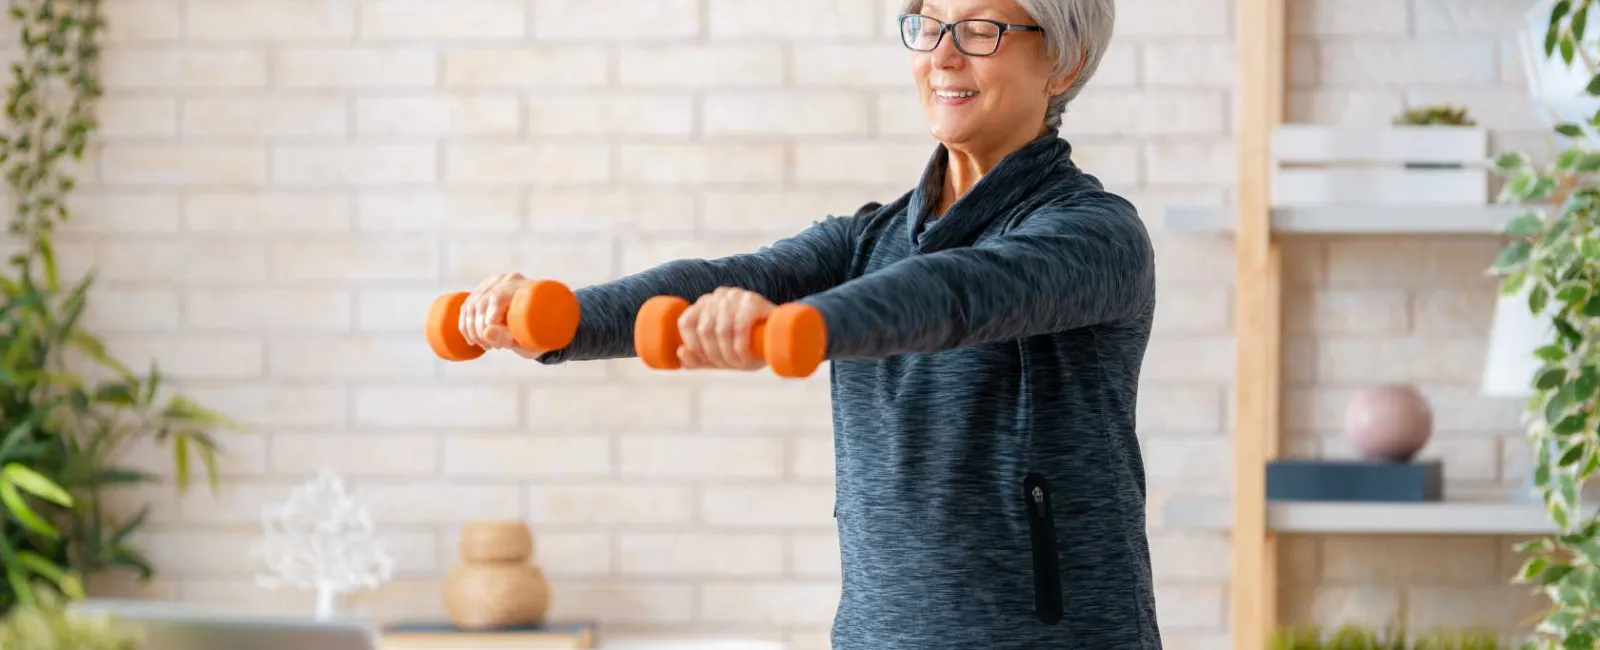 How Caregivers Can Help Seniors Stay Active At Home